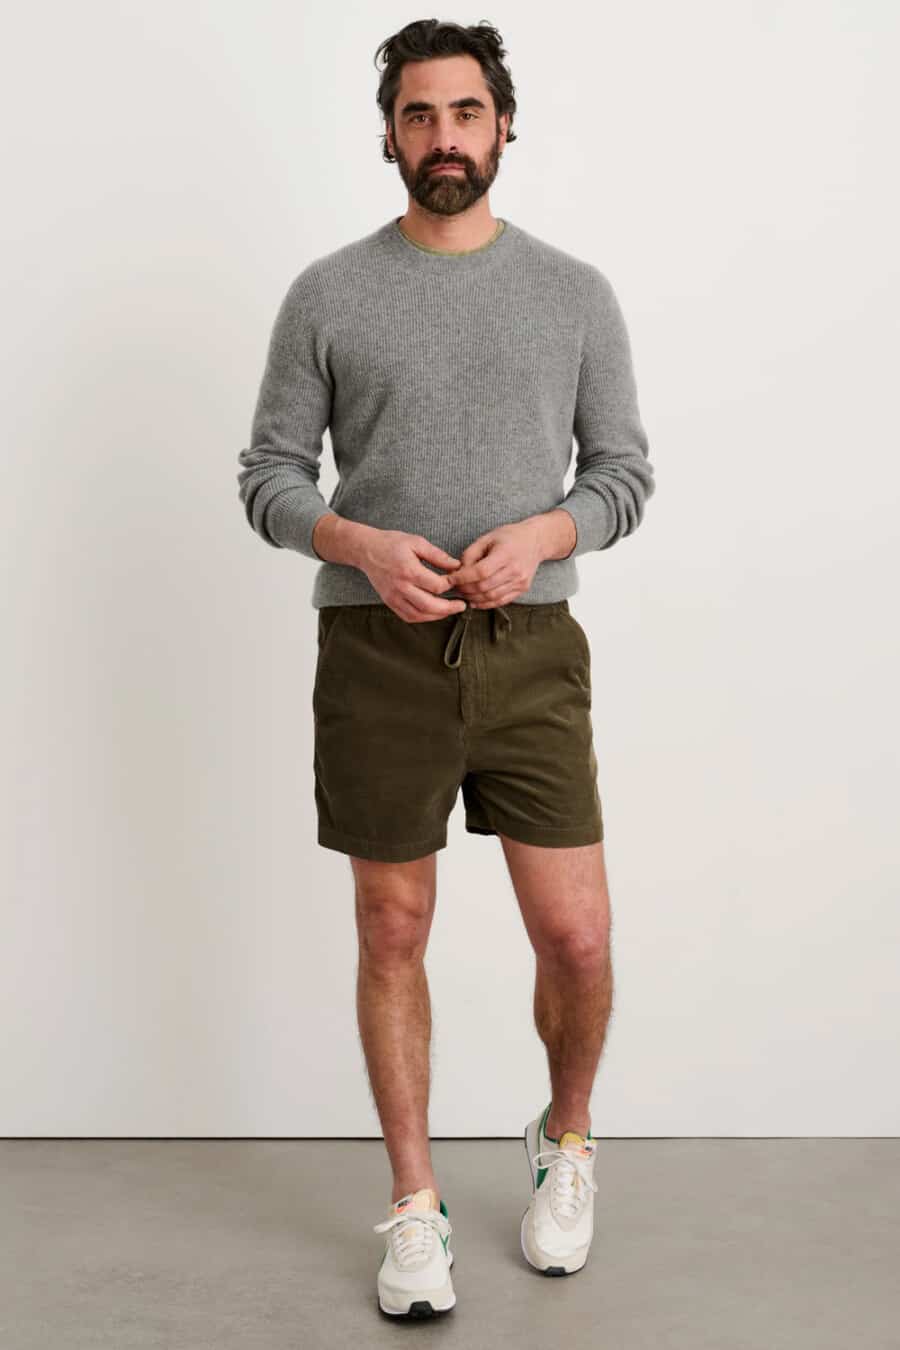 Men's dark green drawstring shorts, grey crew neck sweater and white sneakers outfit